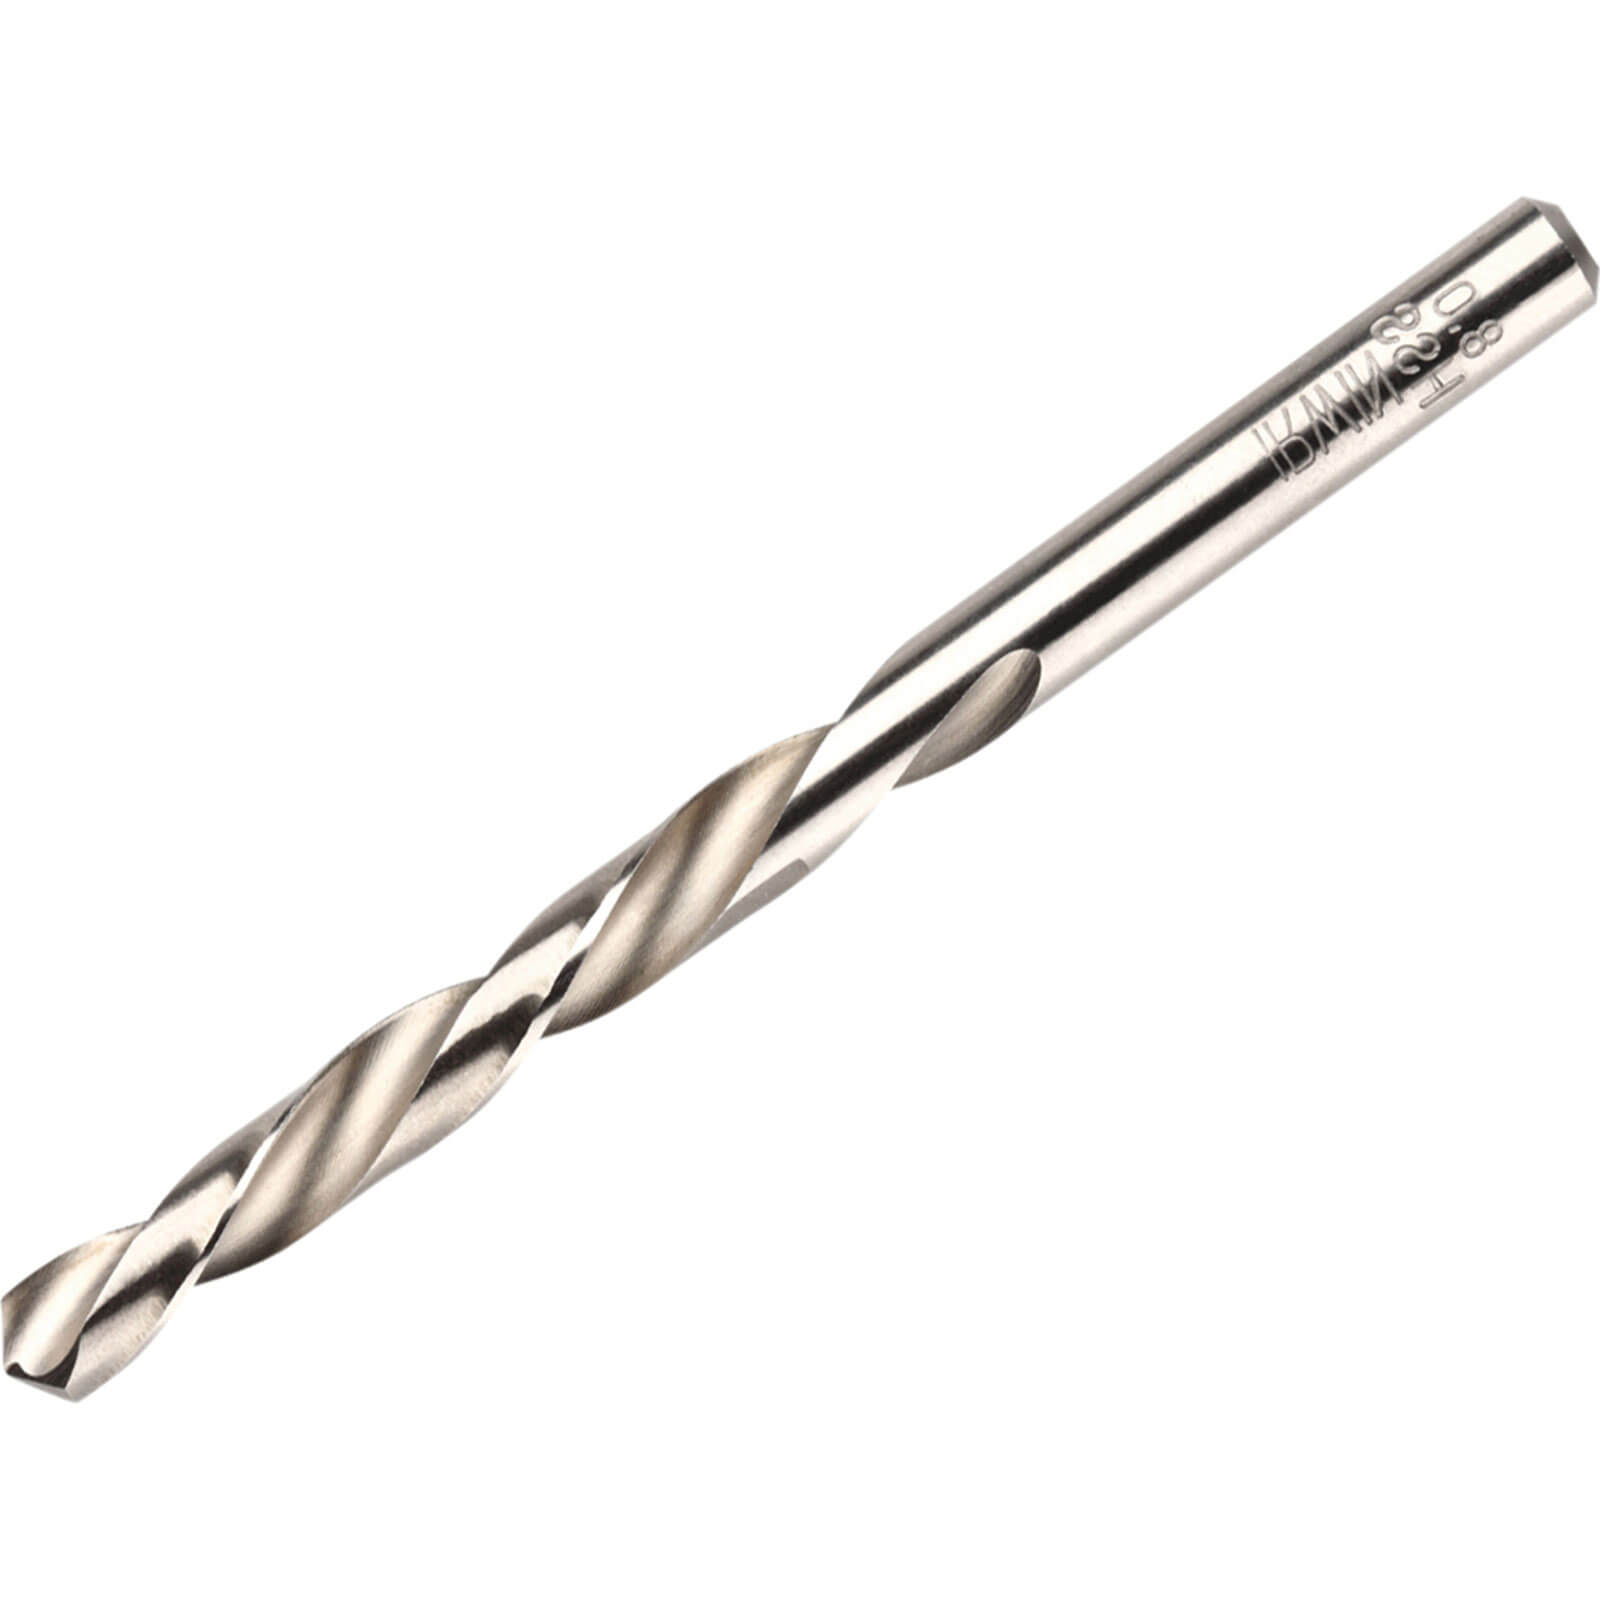 Image of Irwin HSS Pro Drill Bits 12mm Pack of 10